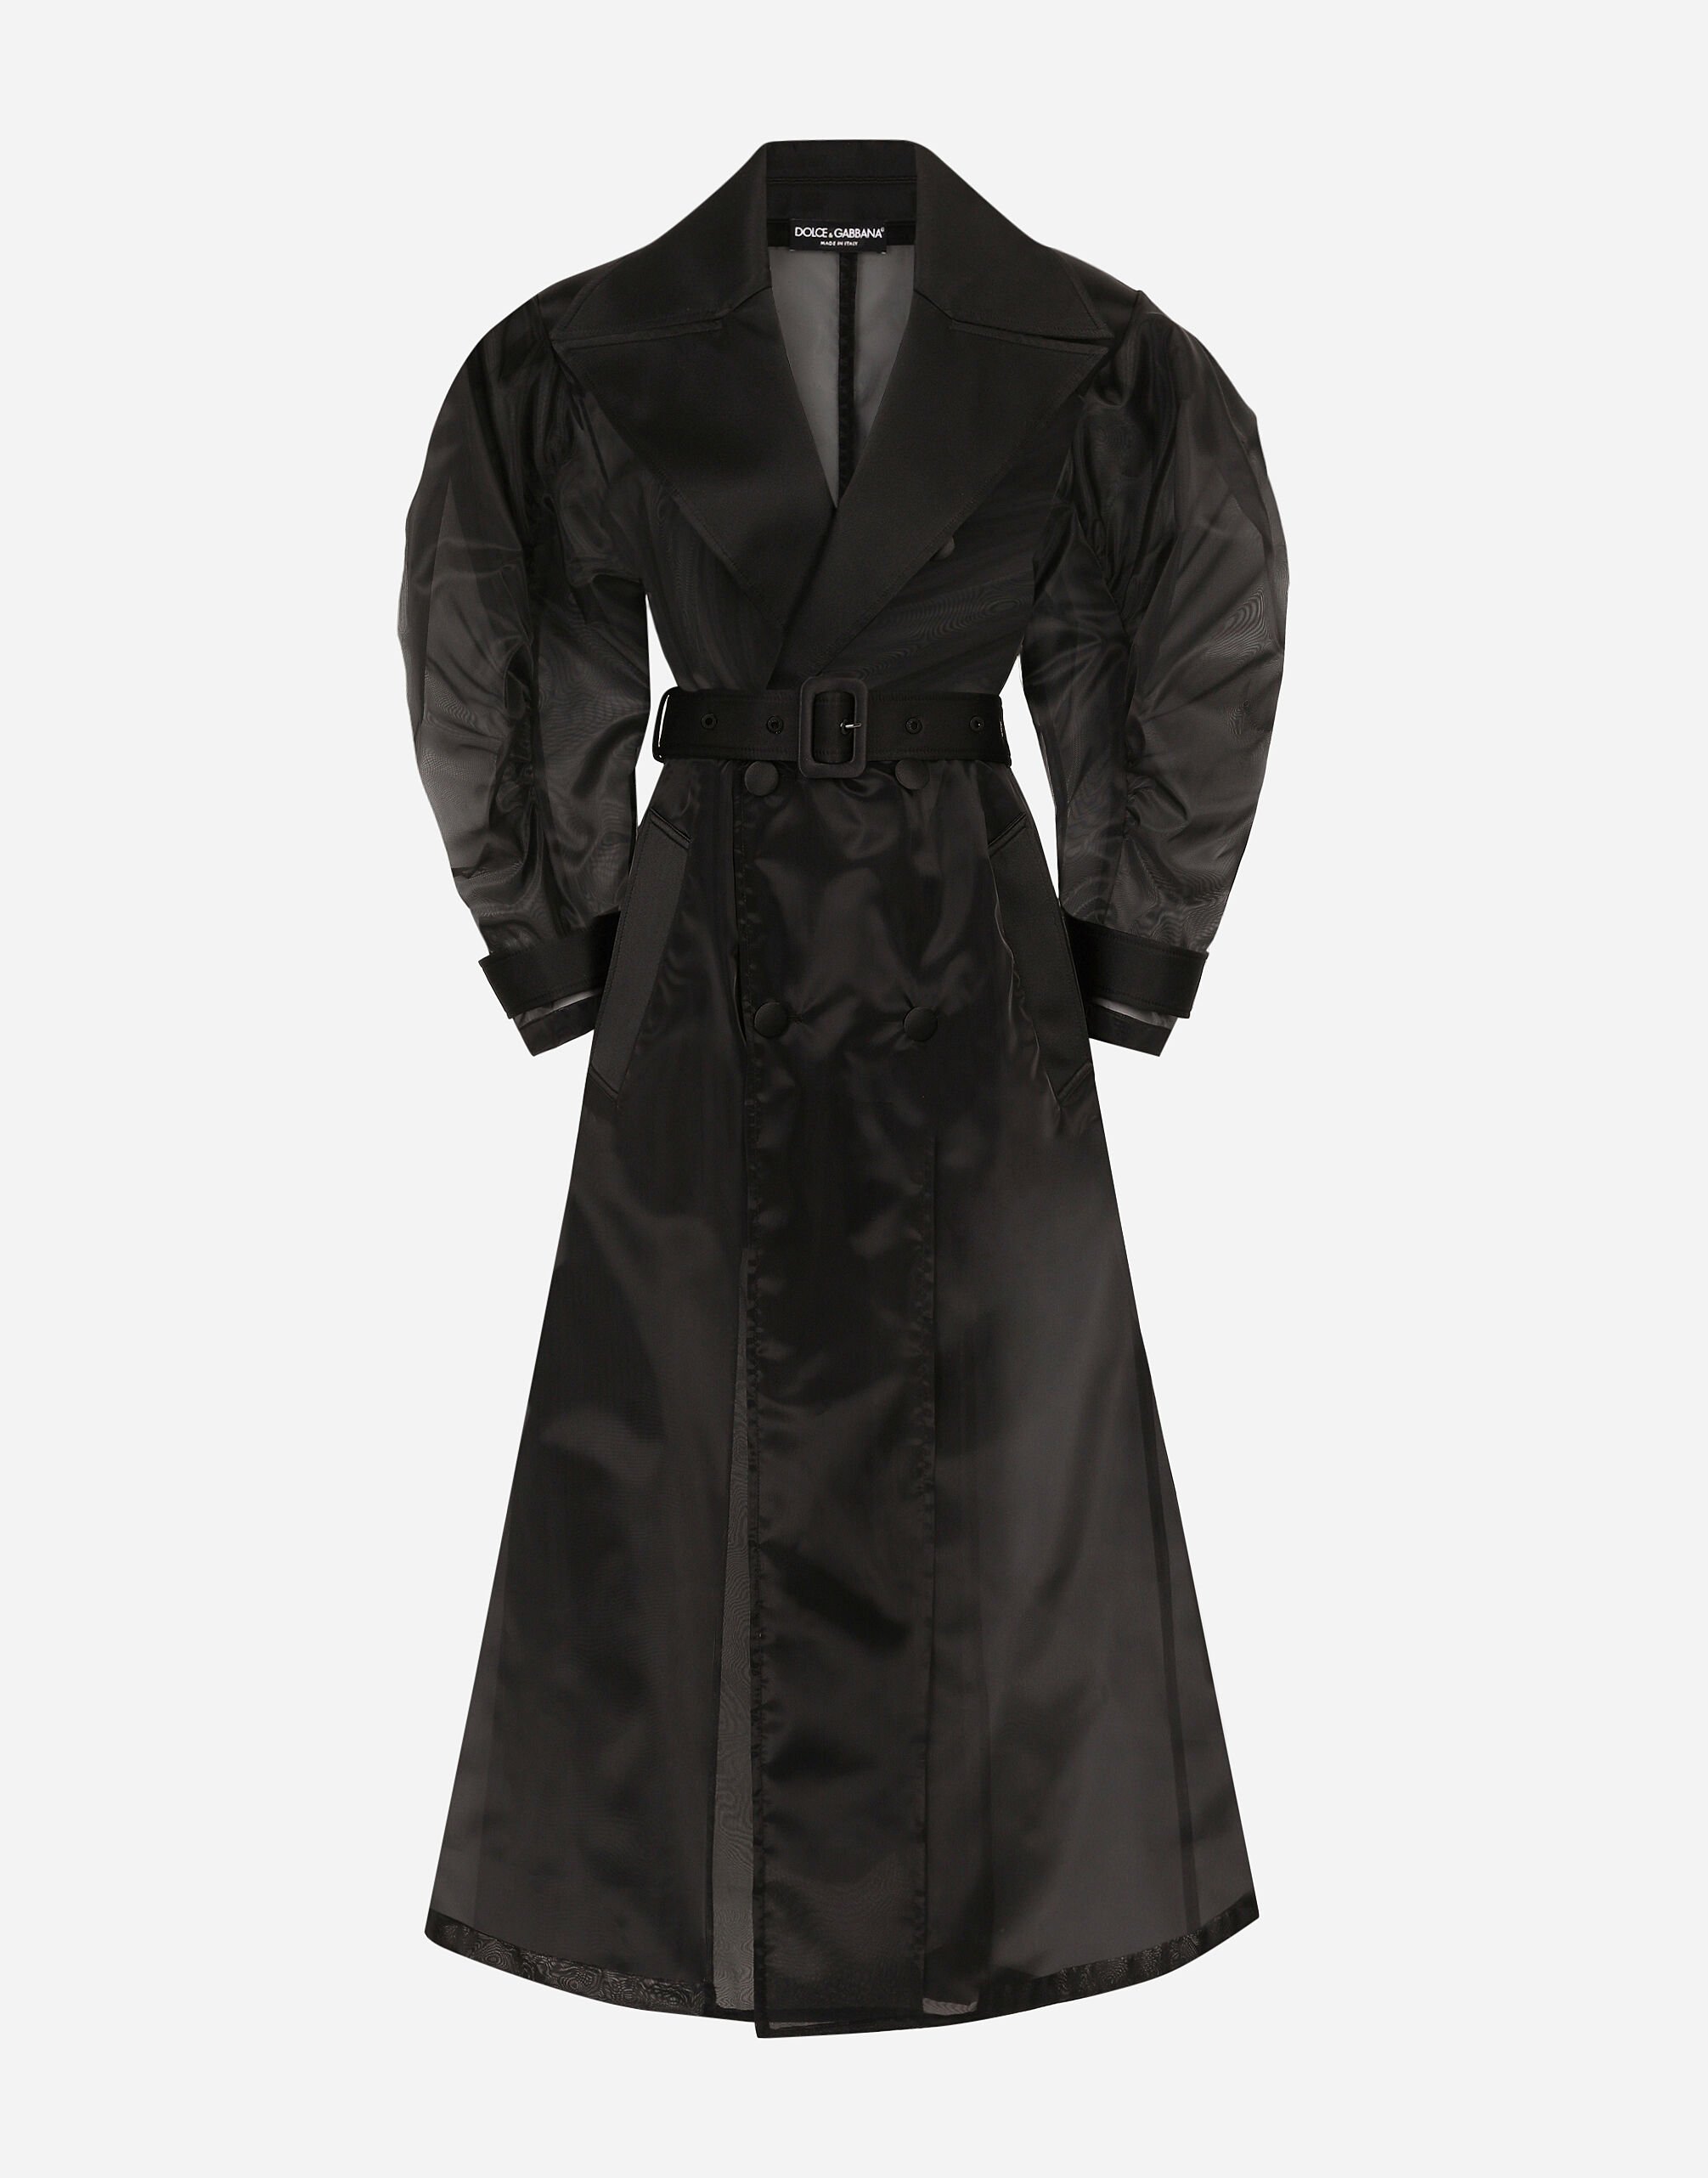 Dolce & Gabbana Technical organza trench coat with gathered sleeves Print F0E1YTIS1VH